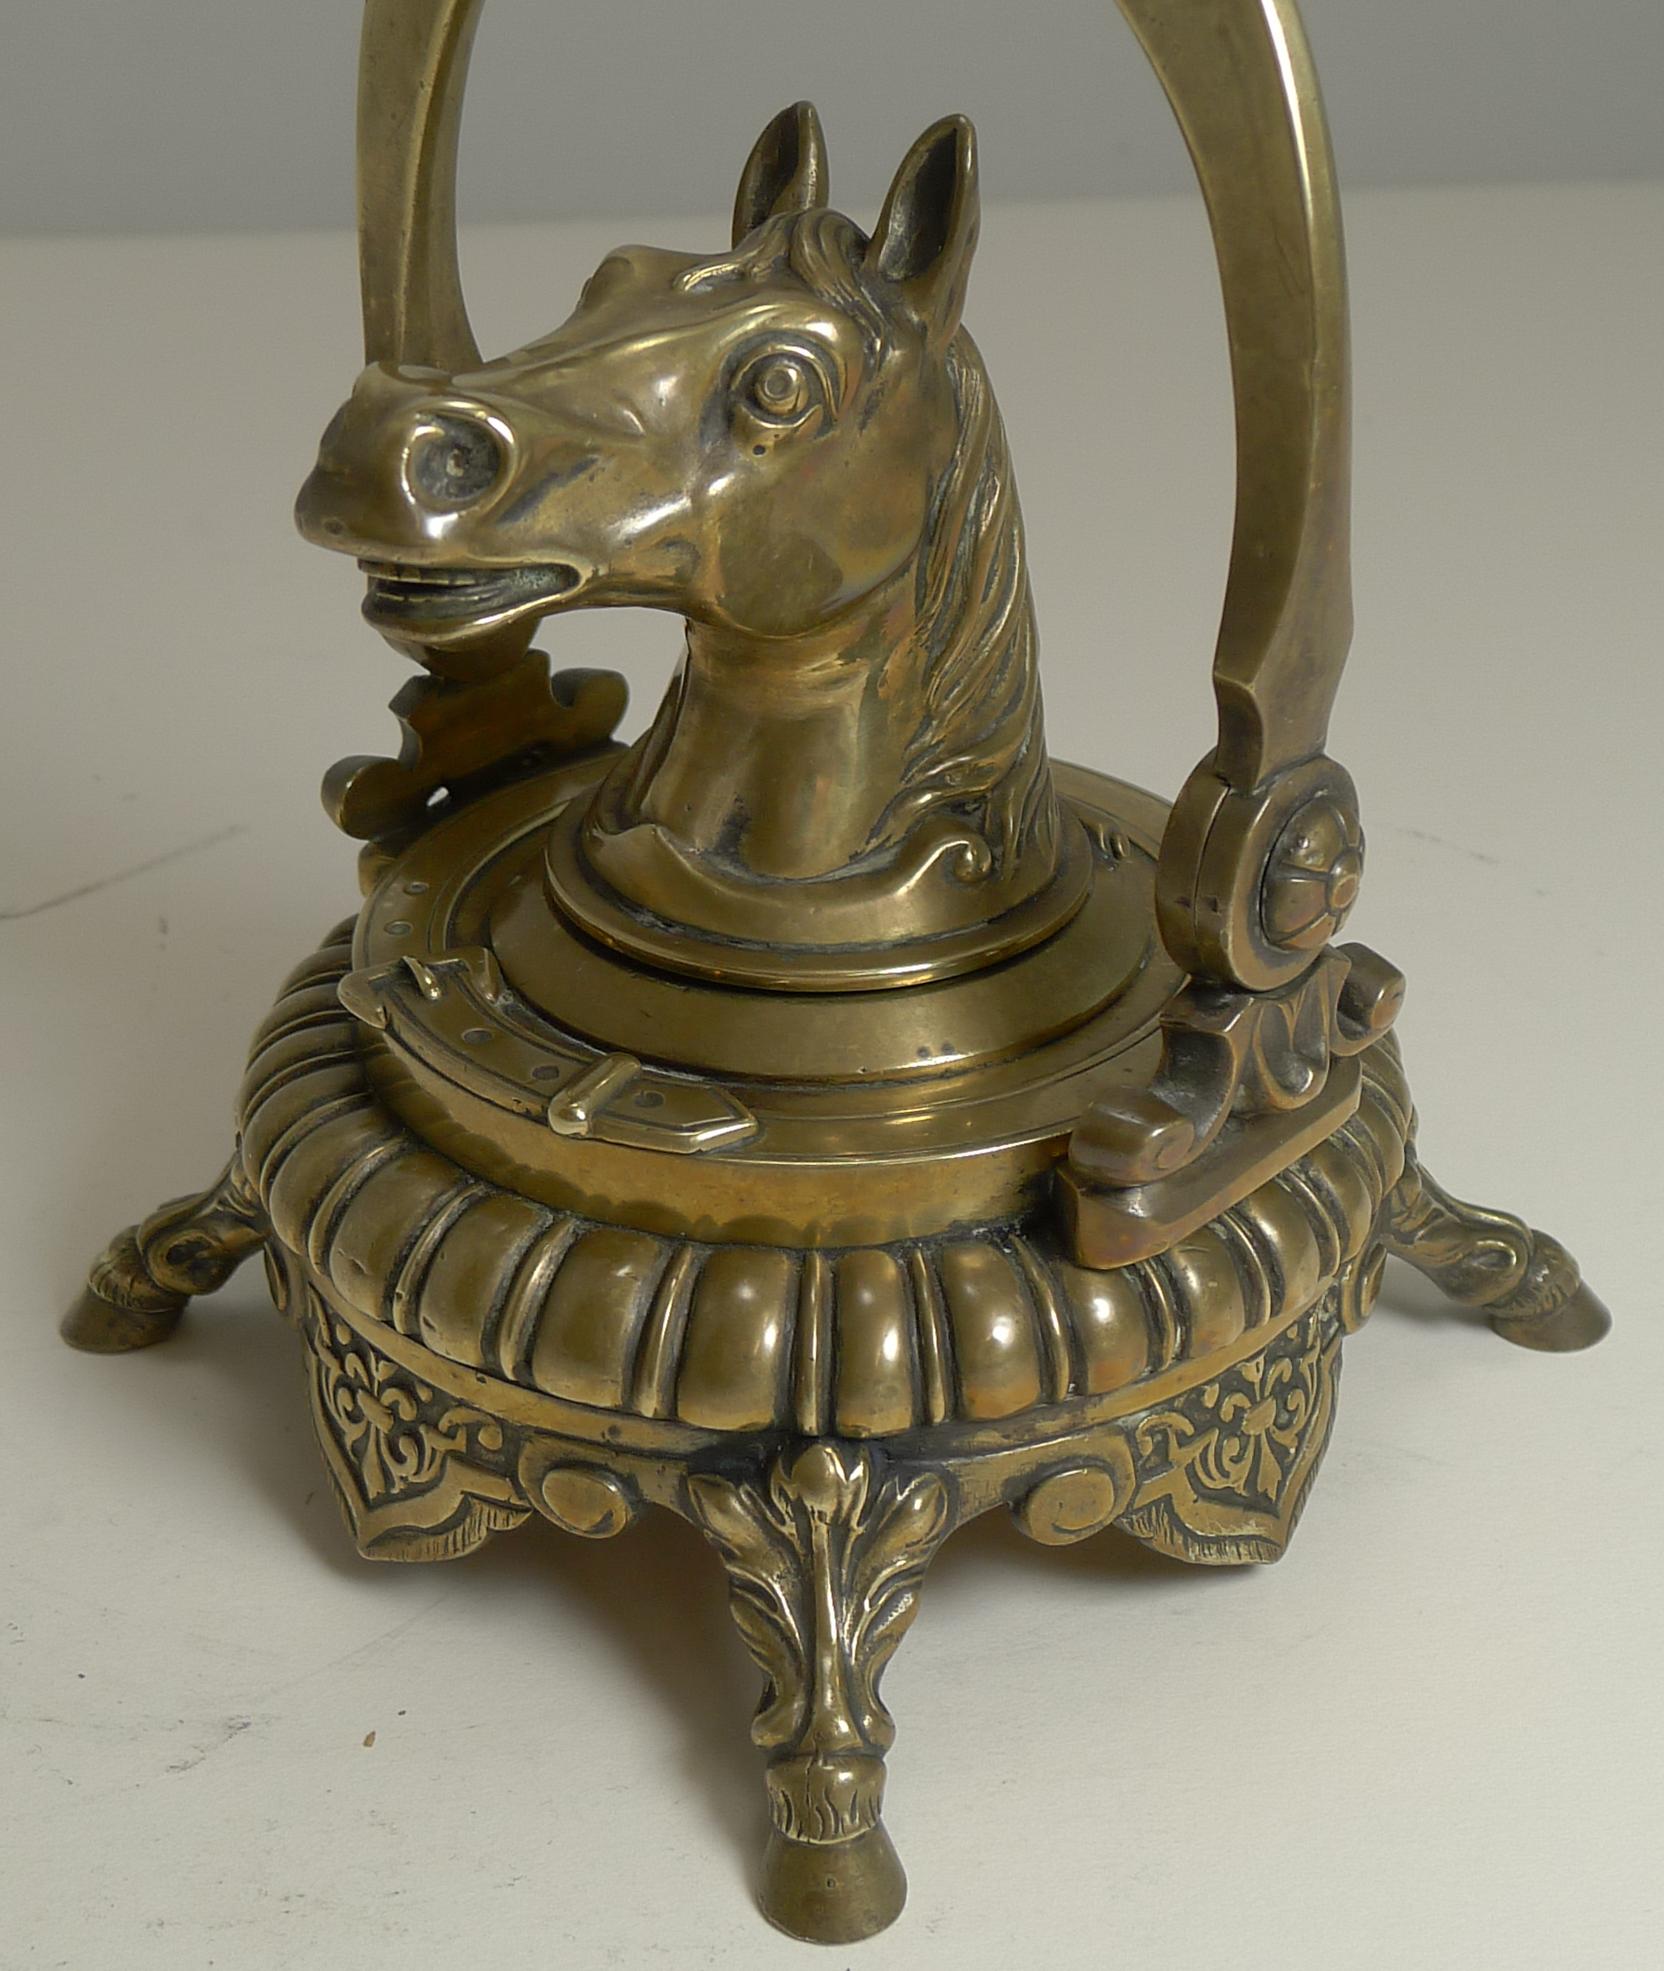 Antique English Novelty Equestrian Inkwell, Horse, circa 1880 For Sale 3